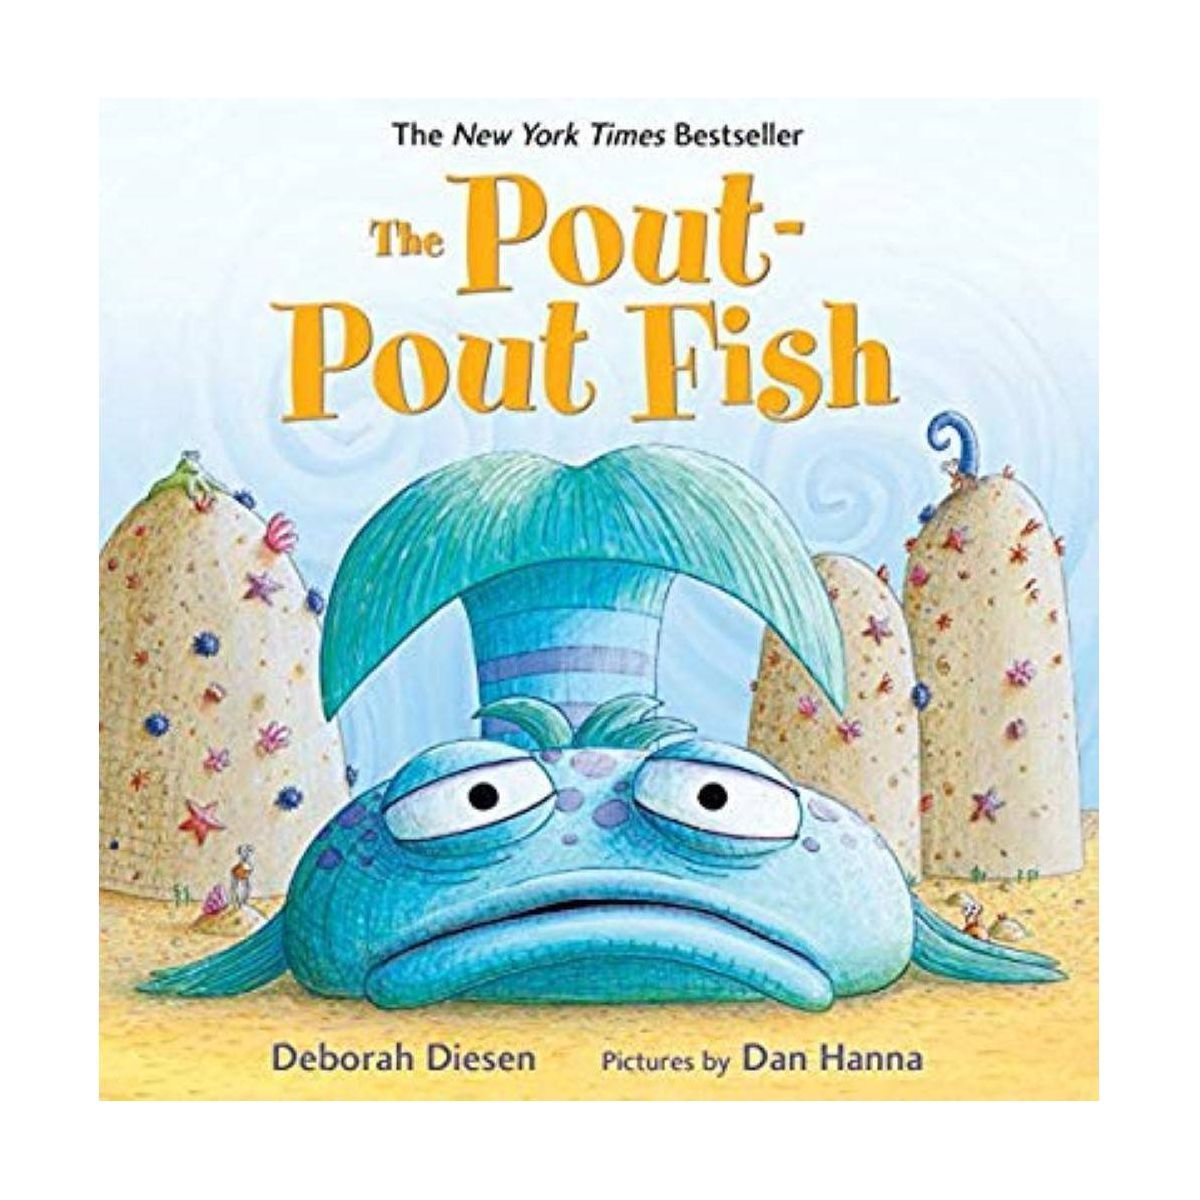 The Pout-Pout Fish (First Edition) by Deborah Diesen and Daniel X. Hanna (Board Book) | Target